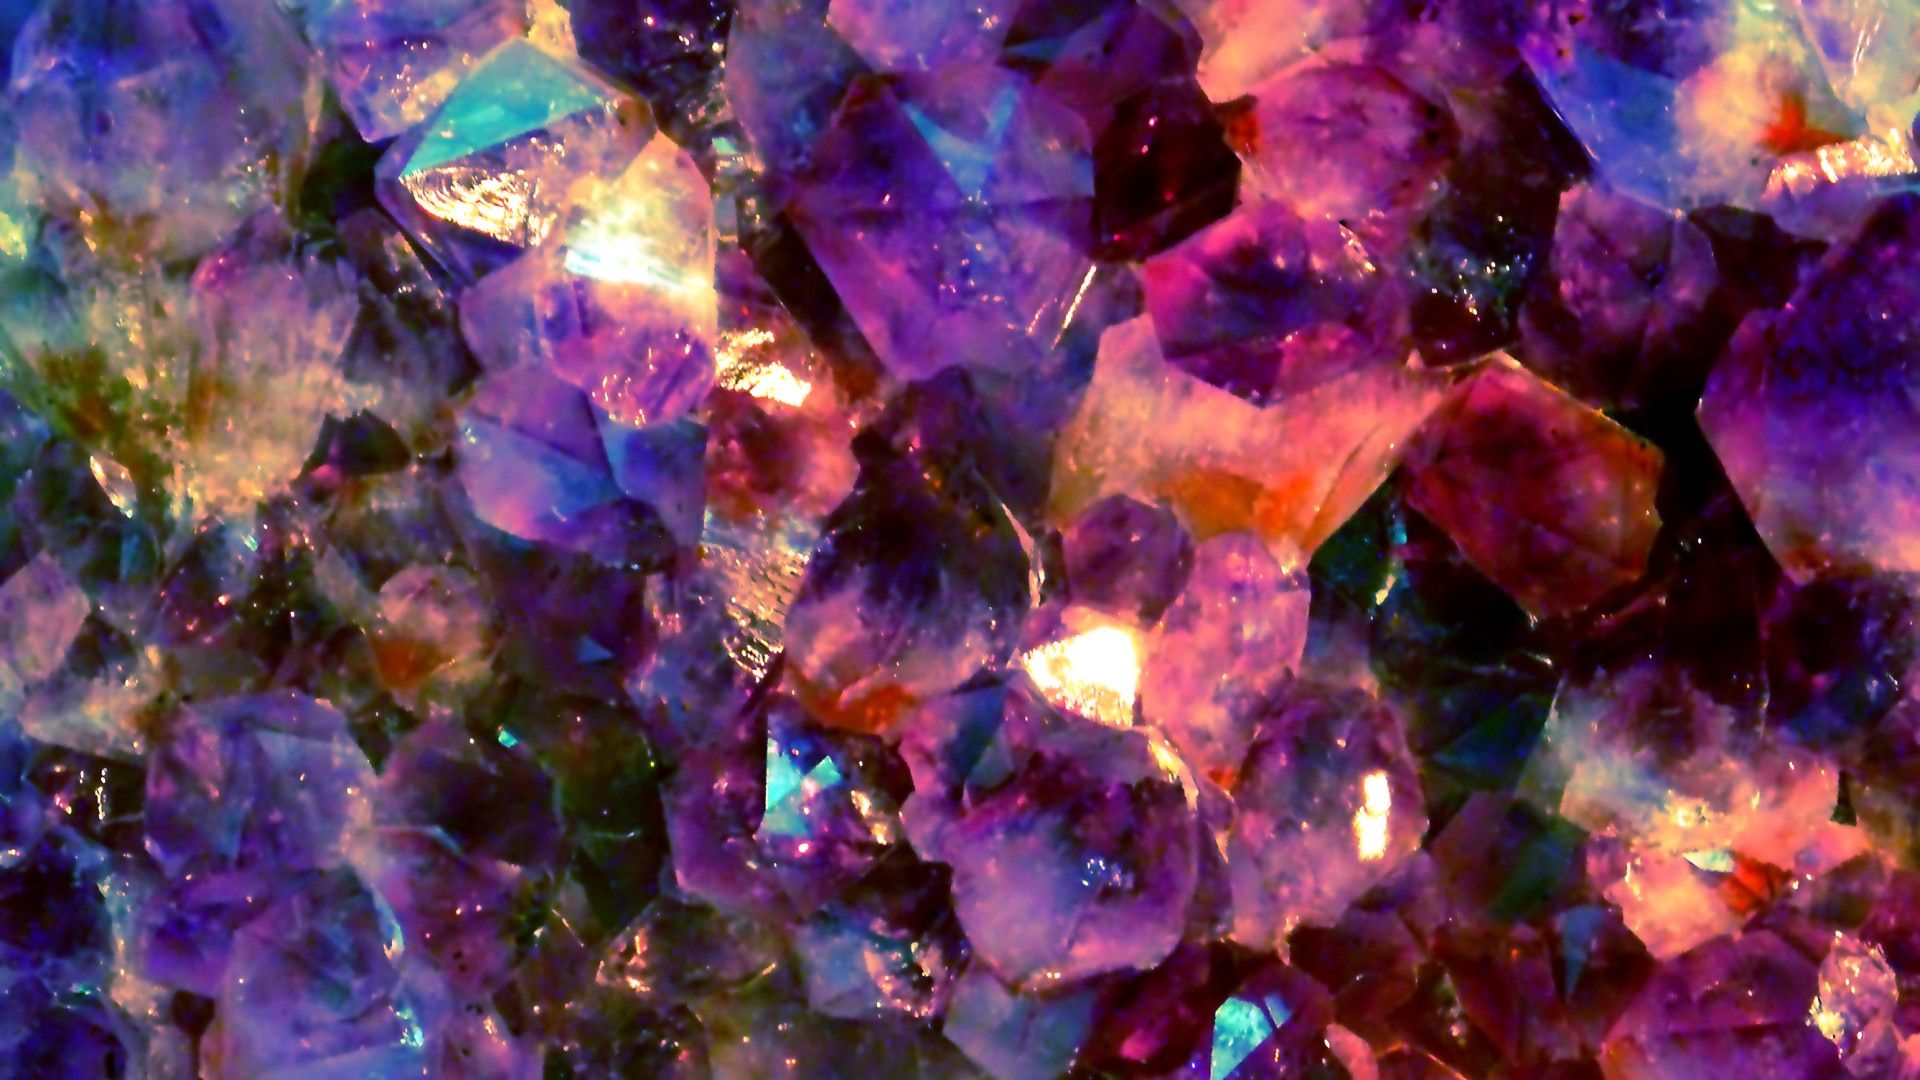 Crystal Stone Background. Crystal Wallpaper, Crystal Heart Wallpaper and Sparkling Crystal Unicorn Wallpaper